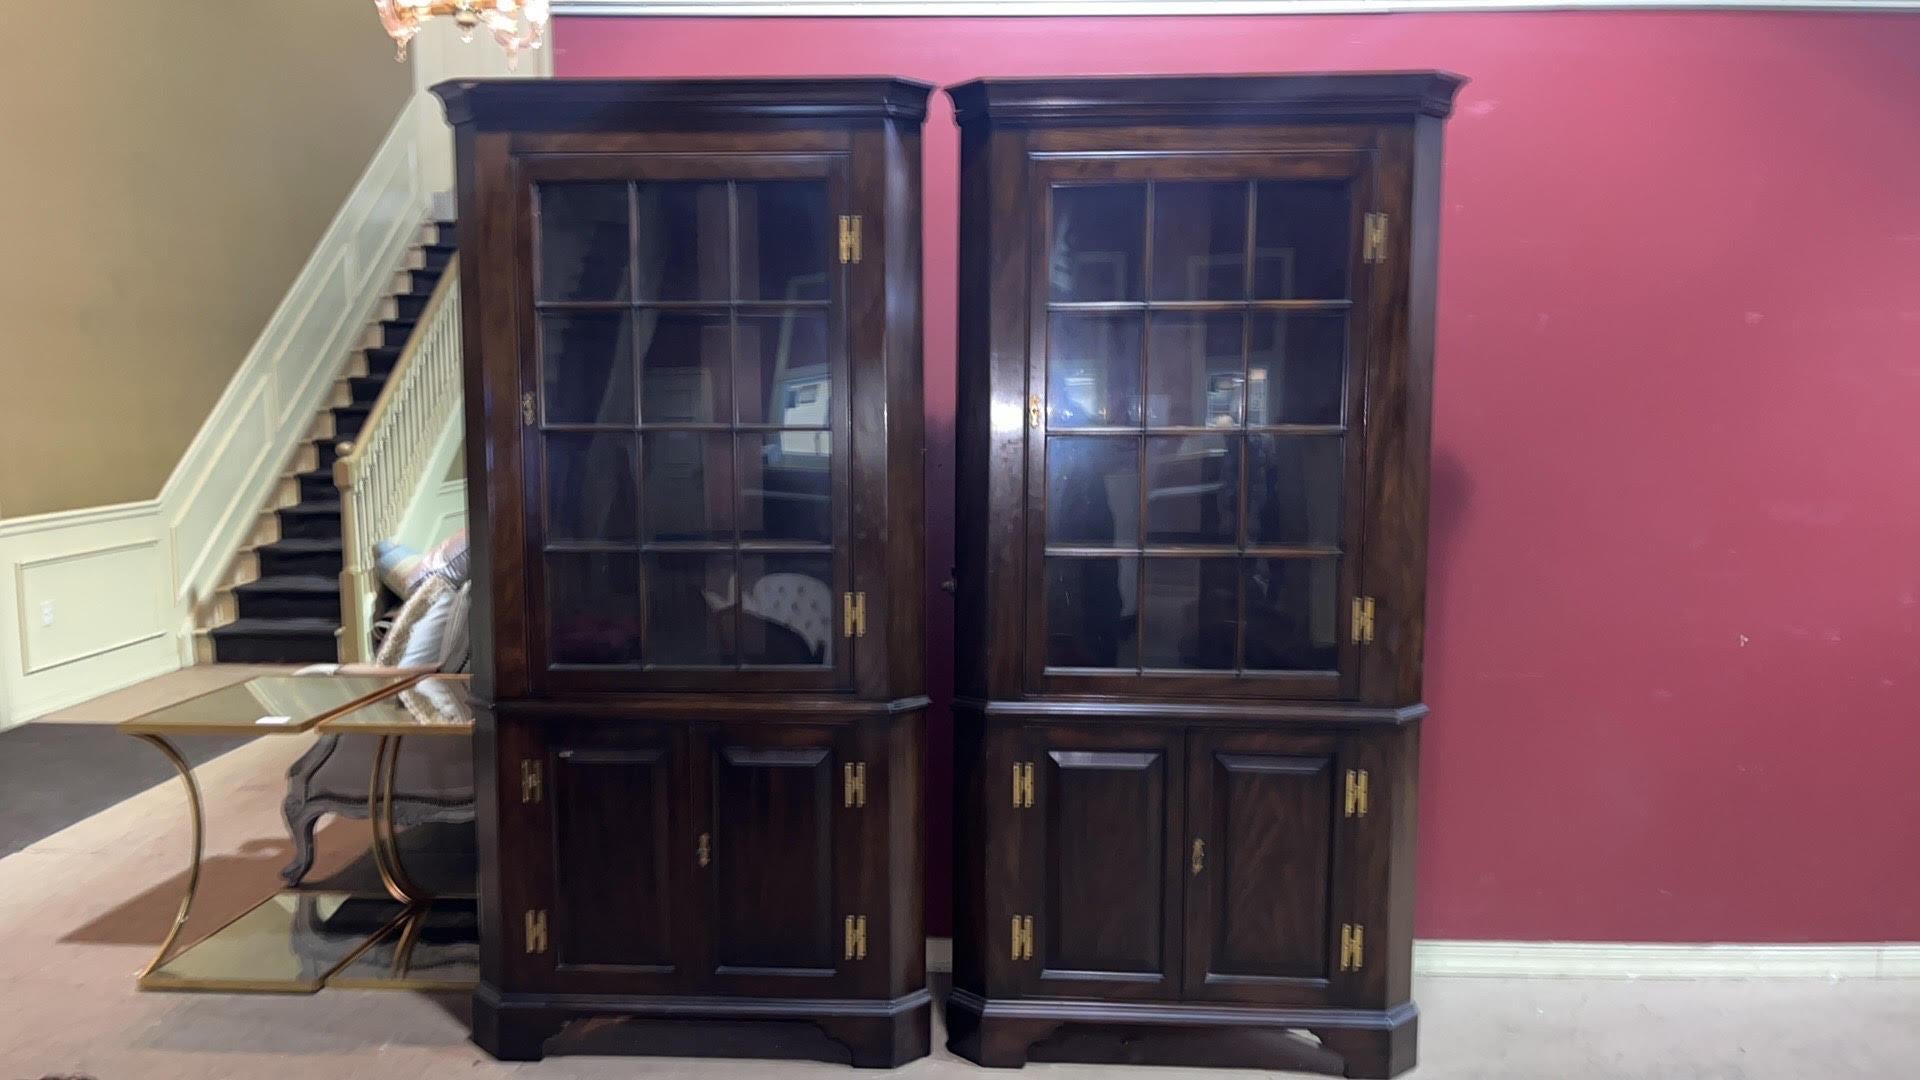 Henkel Harris has always been known as one of America's last great companies that still made furniture in solid mahogany and still used individual glazed glass panes. The cabinets are in good condition with minor scuffs and signs of age and are